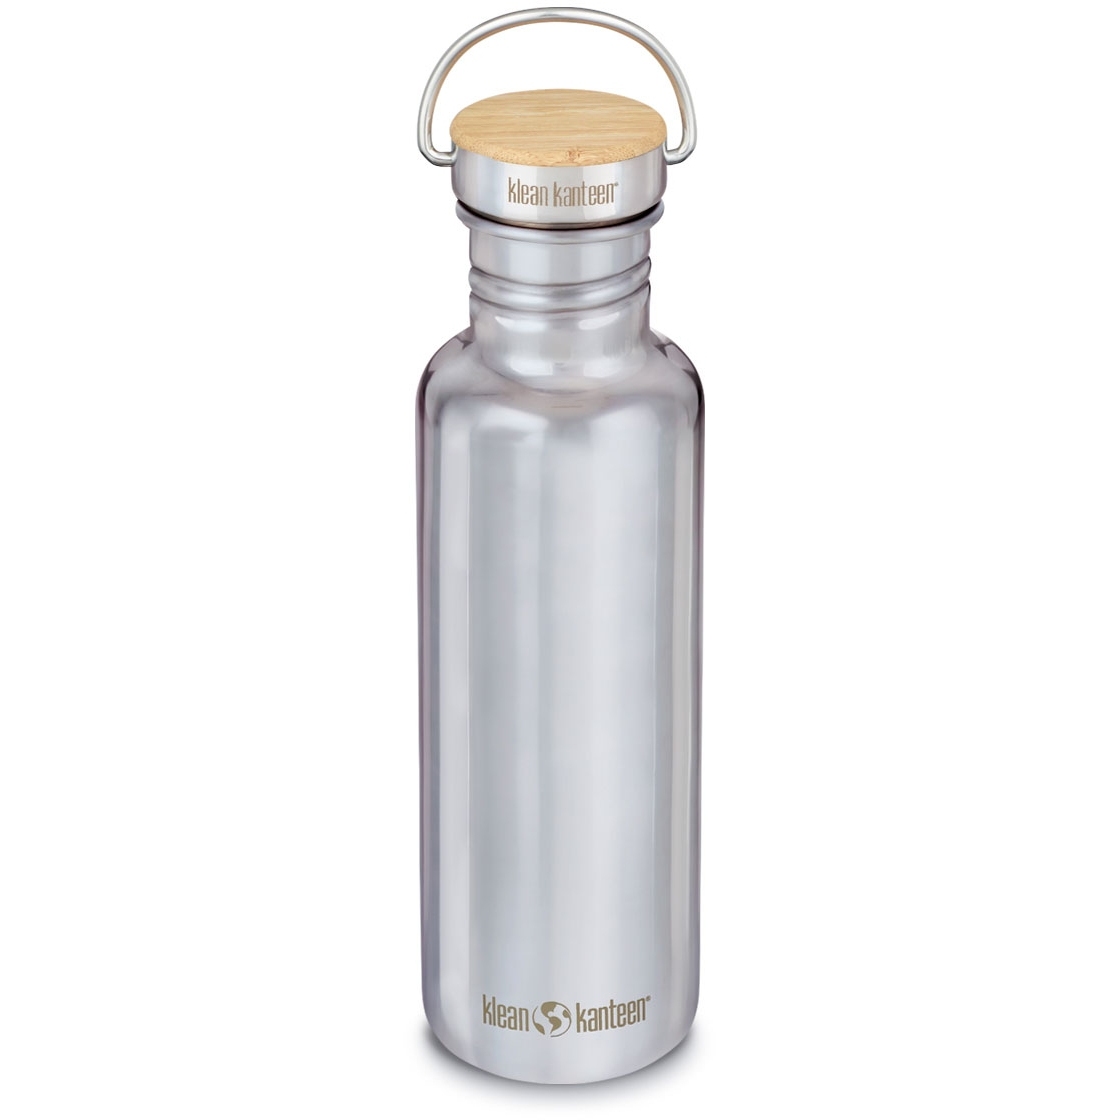 Image of Klean Kanteen Reflect Bottle with Bamboo Cap 532 ml - Mirrored Stainless